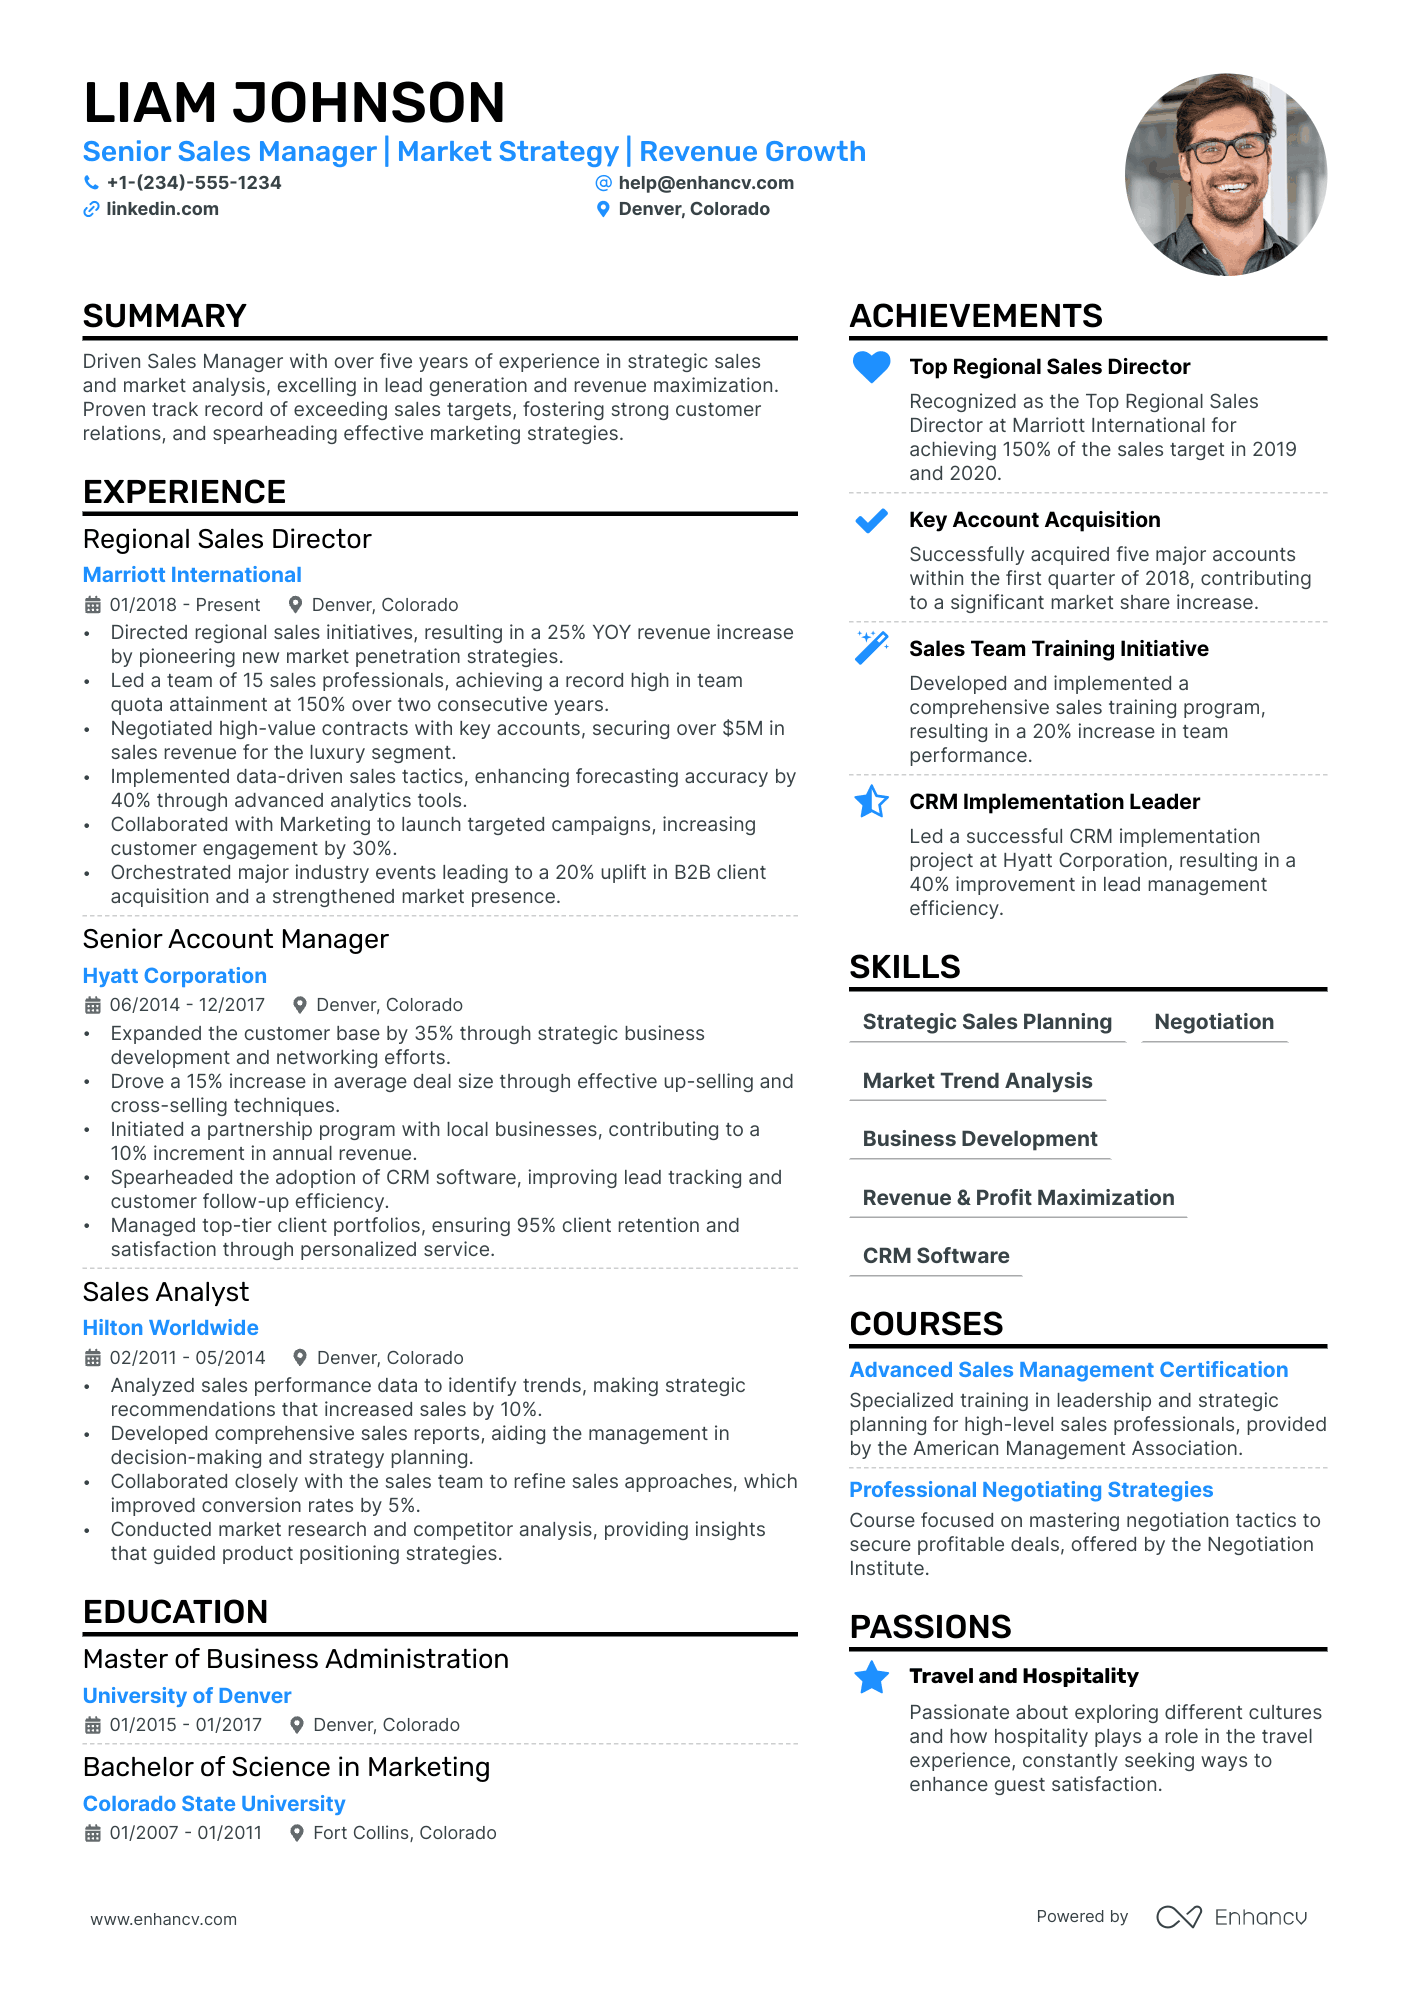 Corporate Sales Manager resume example